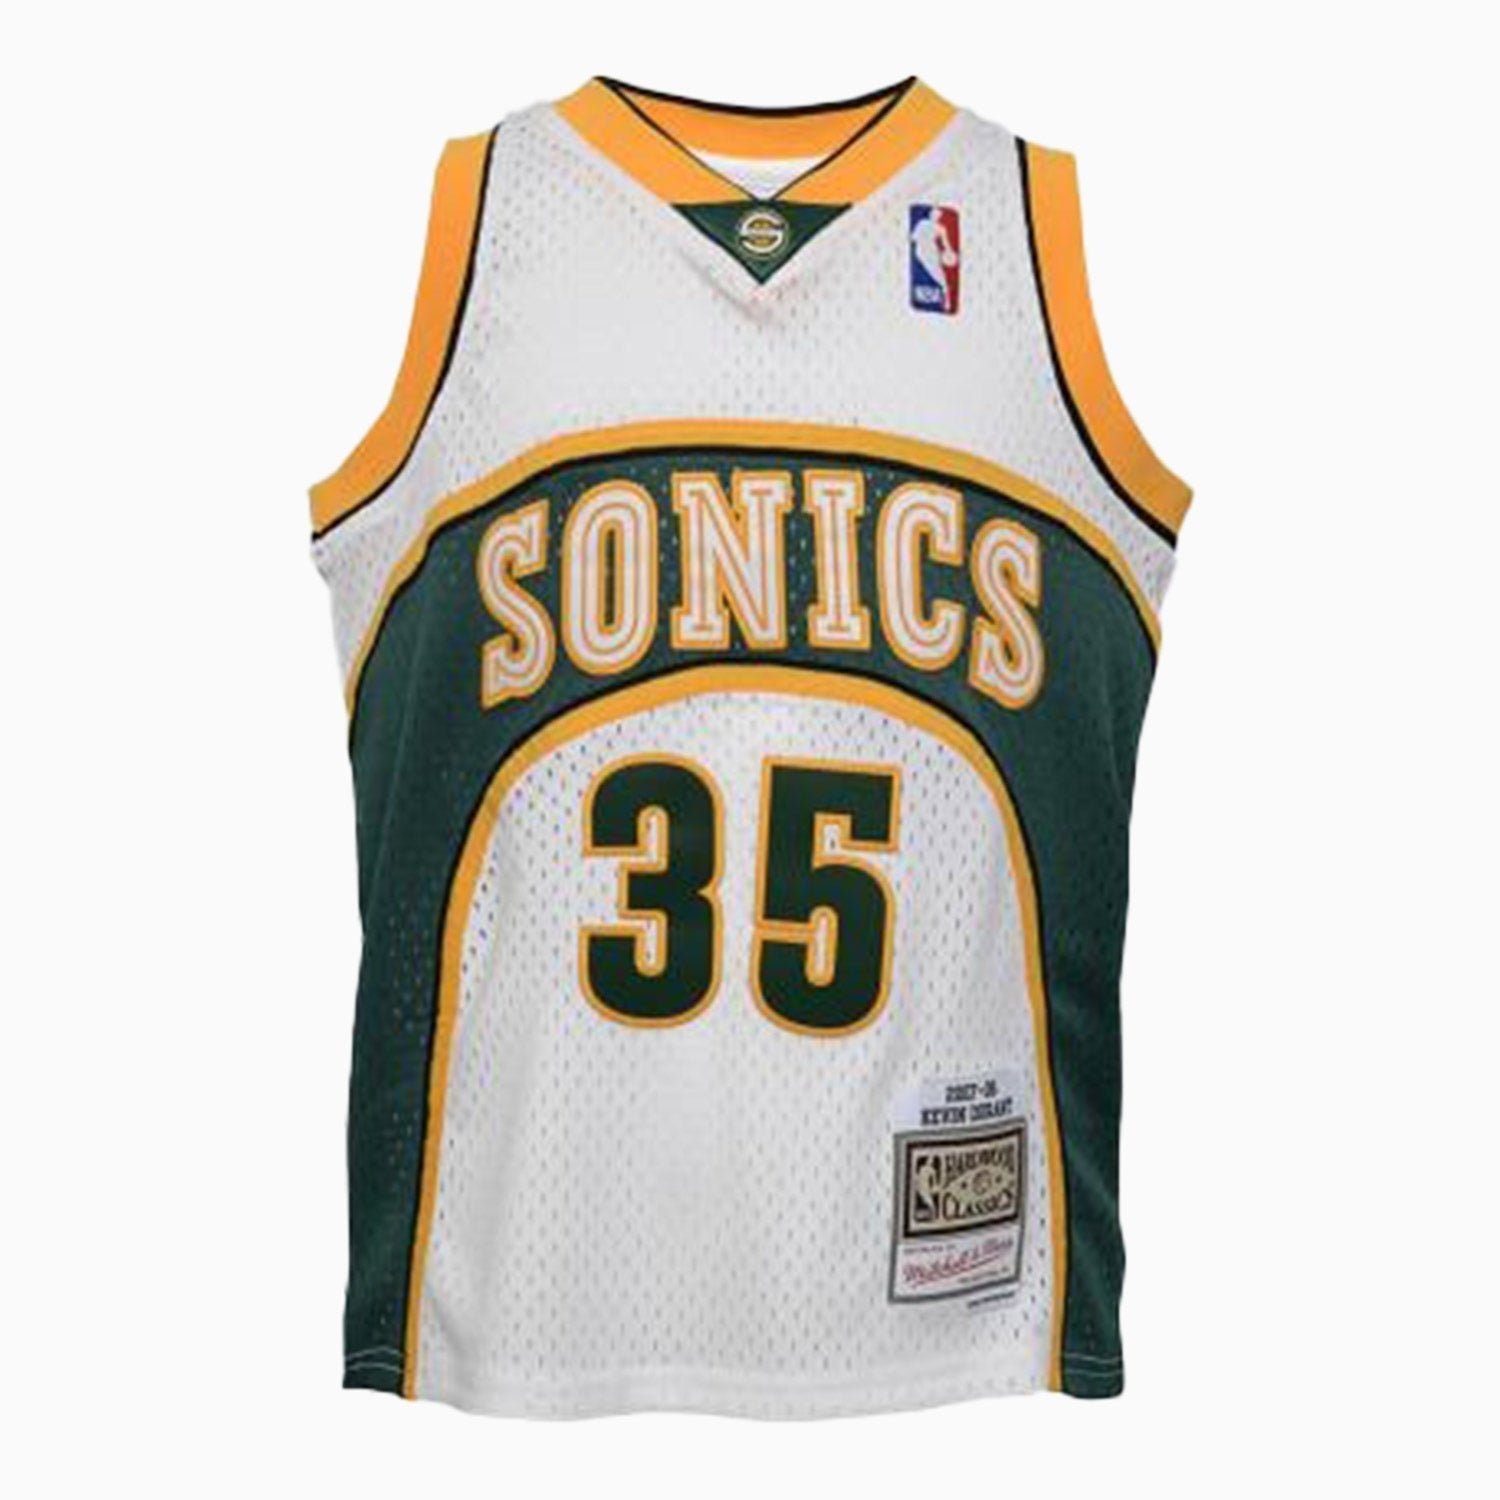 kevin durant youth jersey